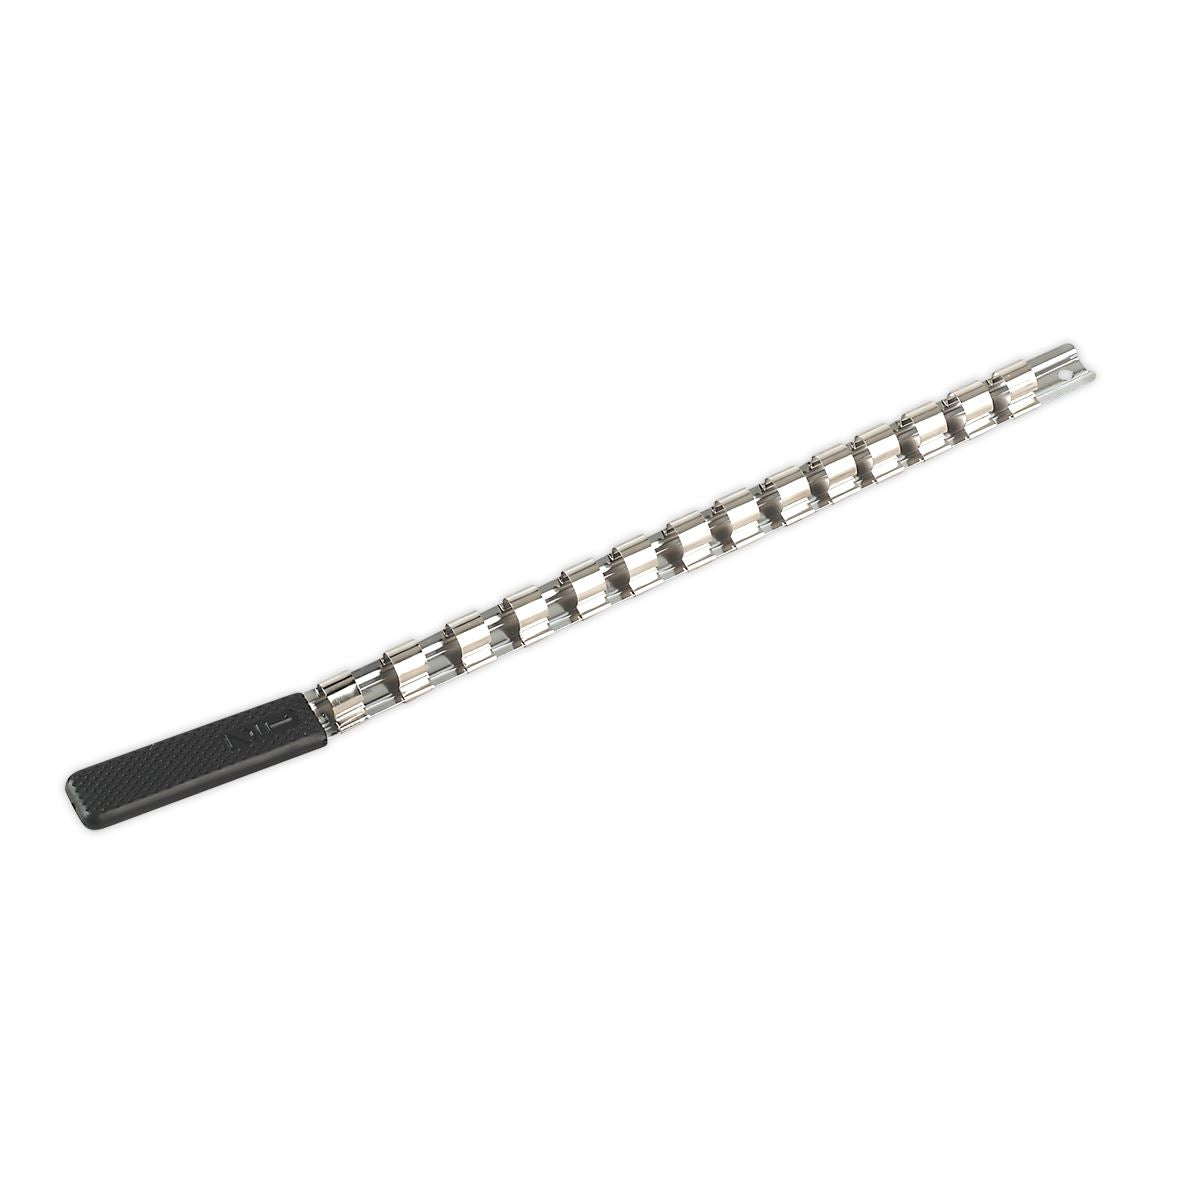 Sealey Premier Socket Retaining Rail with 14 Clips 1/2"Sq Drive